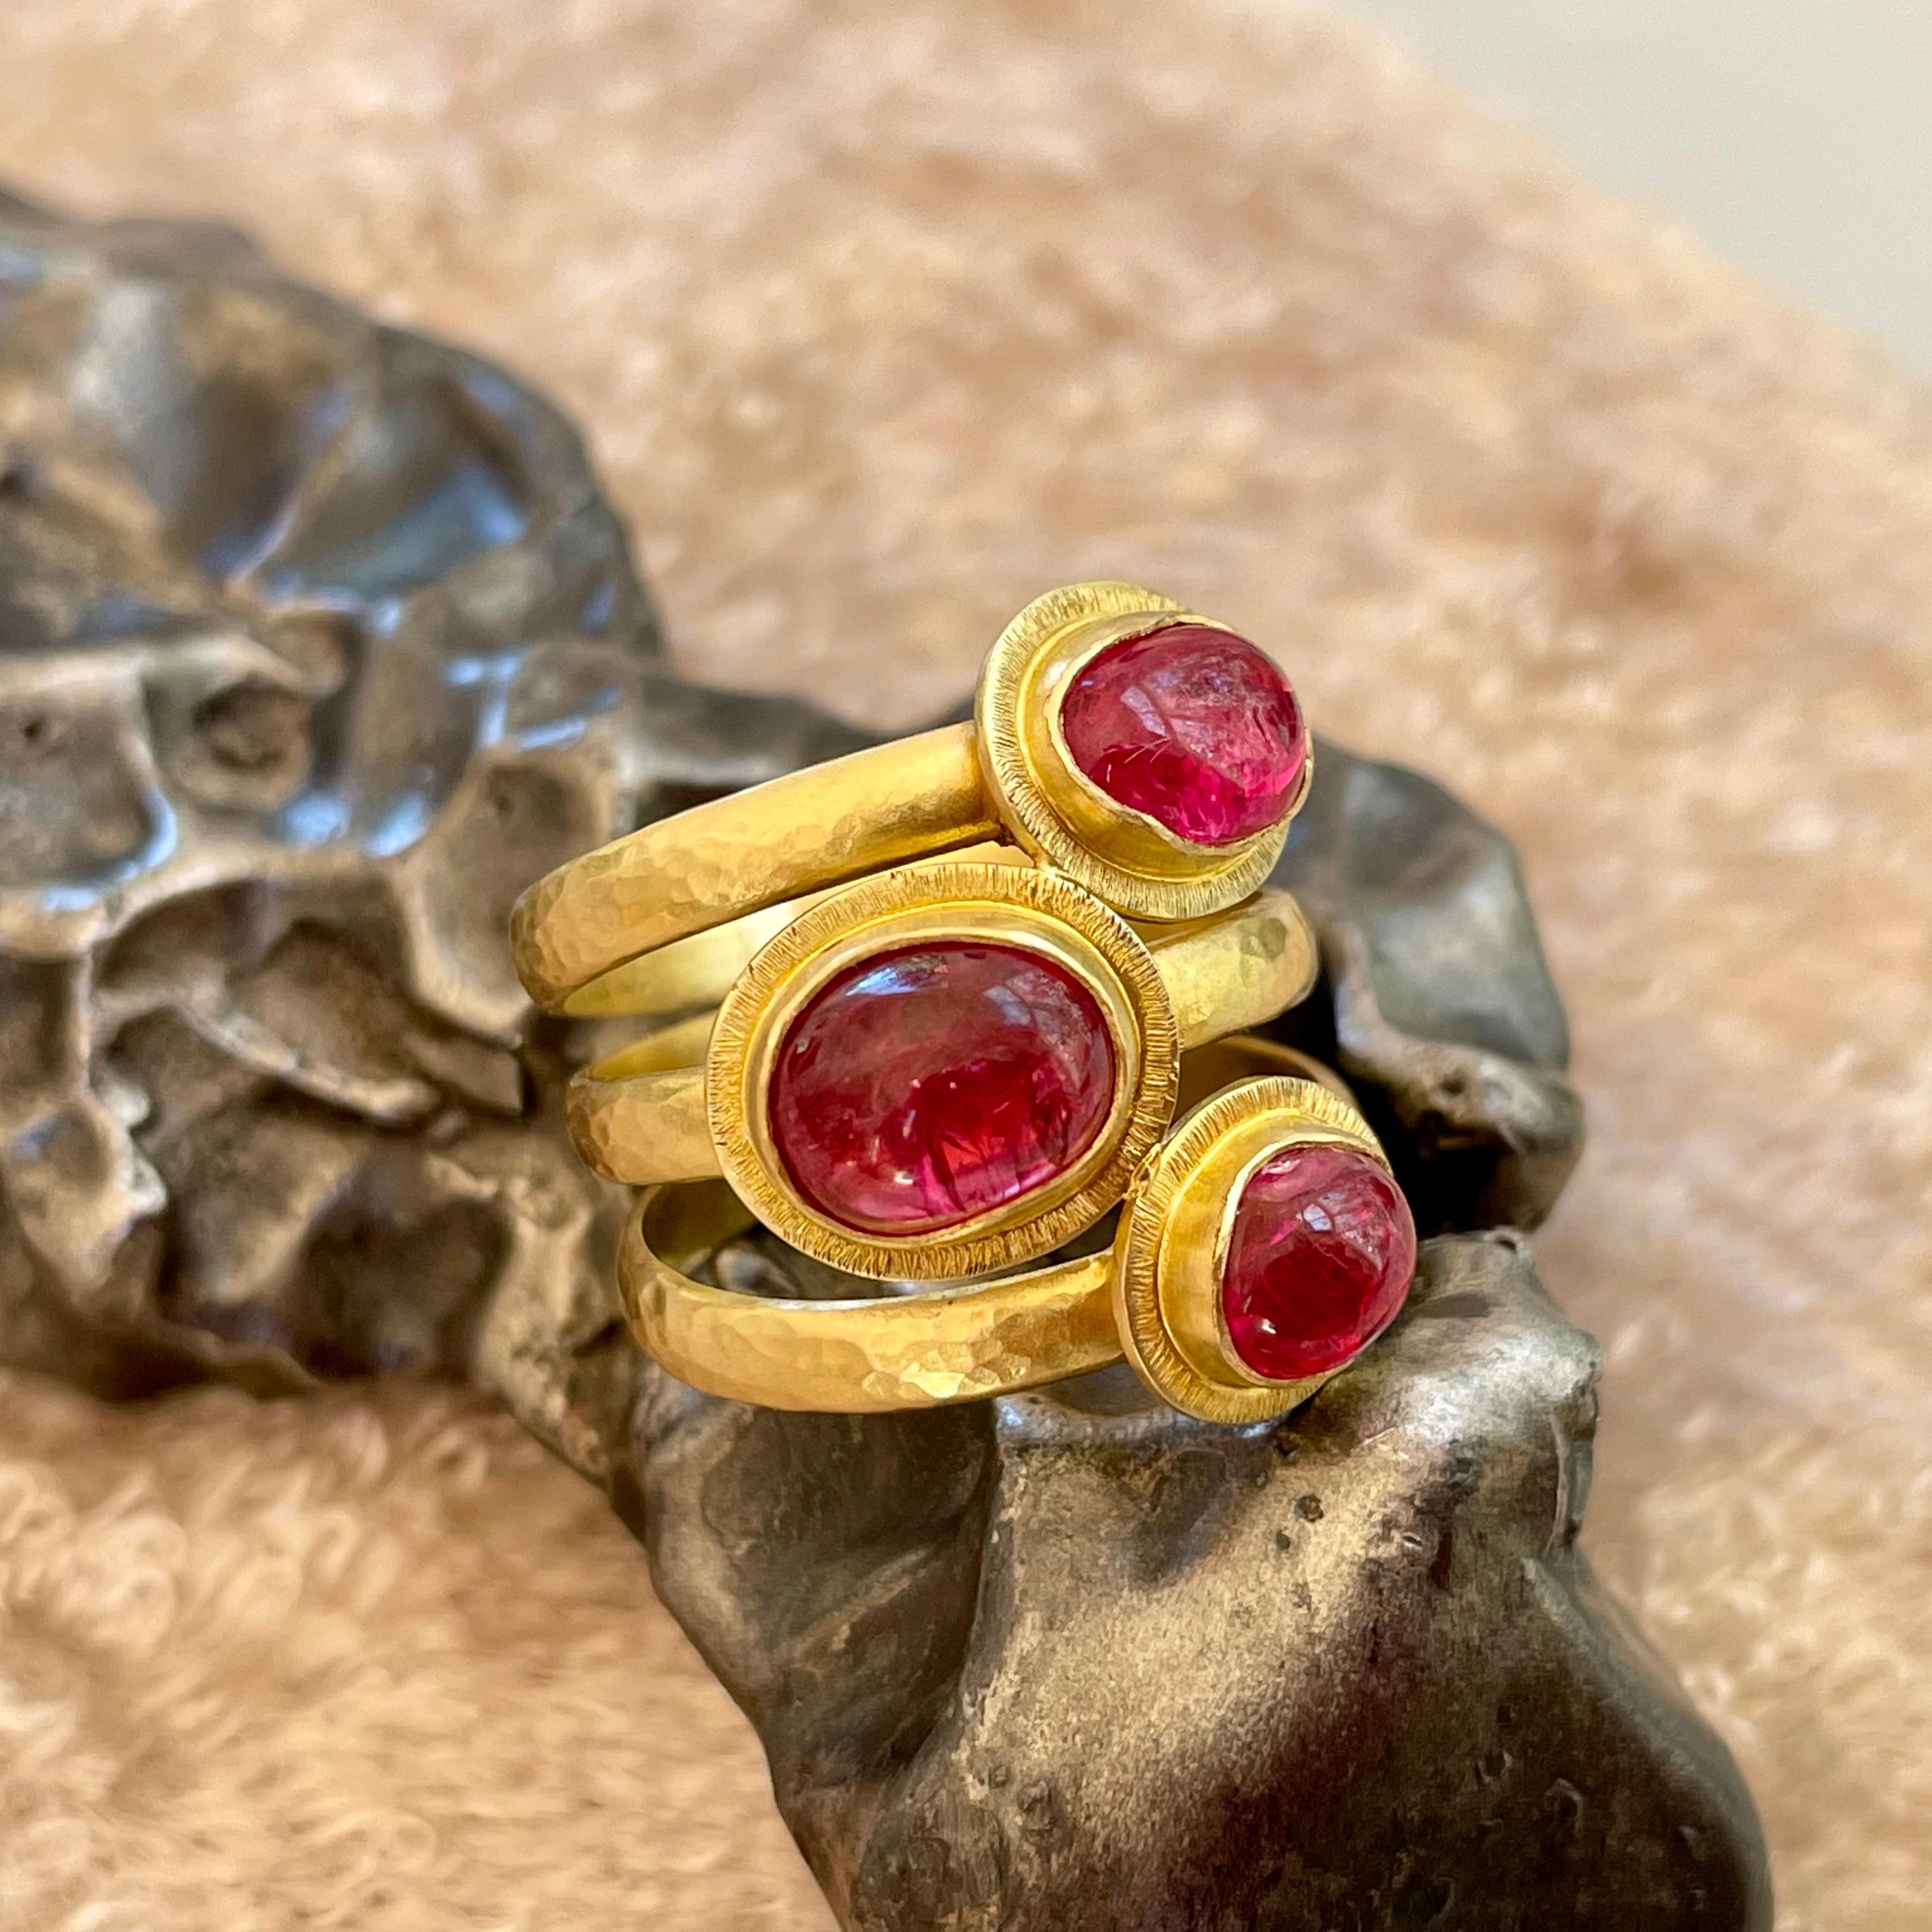 Three organically shaped approximately  6 x 8 mm bright pink Spinel cabochons are set surrounded by irregular line textured bezels on hammered and fused individual bands to create this attractive ancient-inspired piece that could have been found in